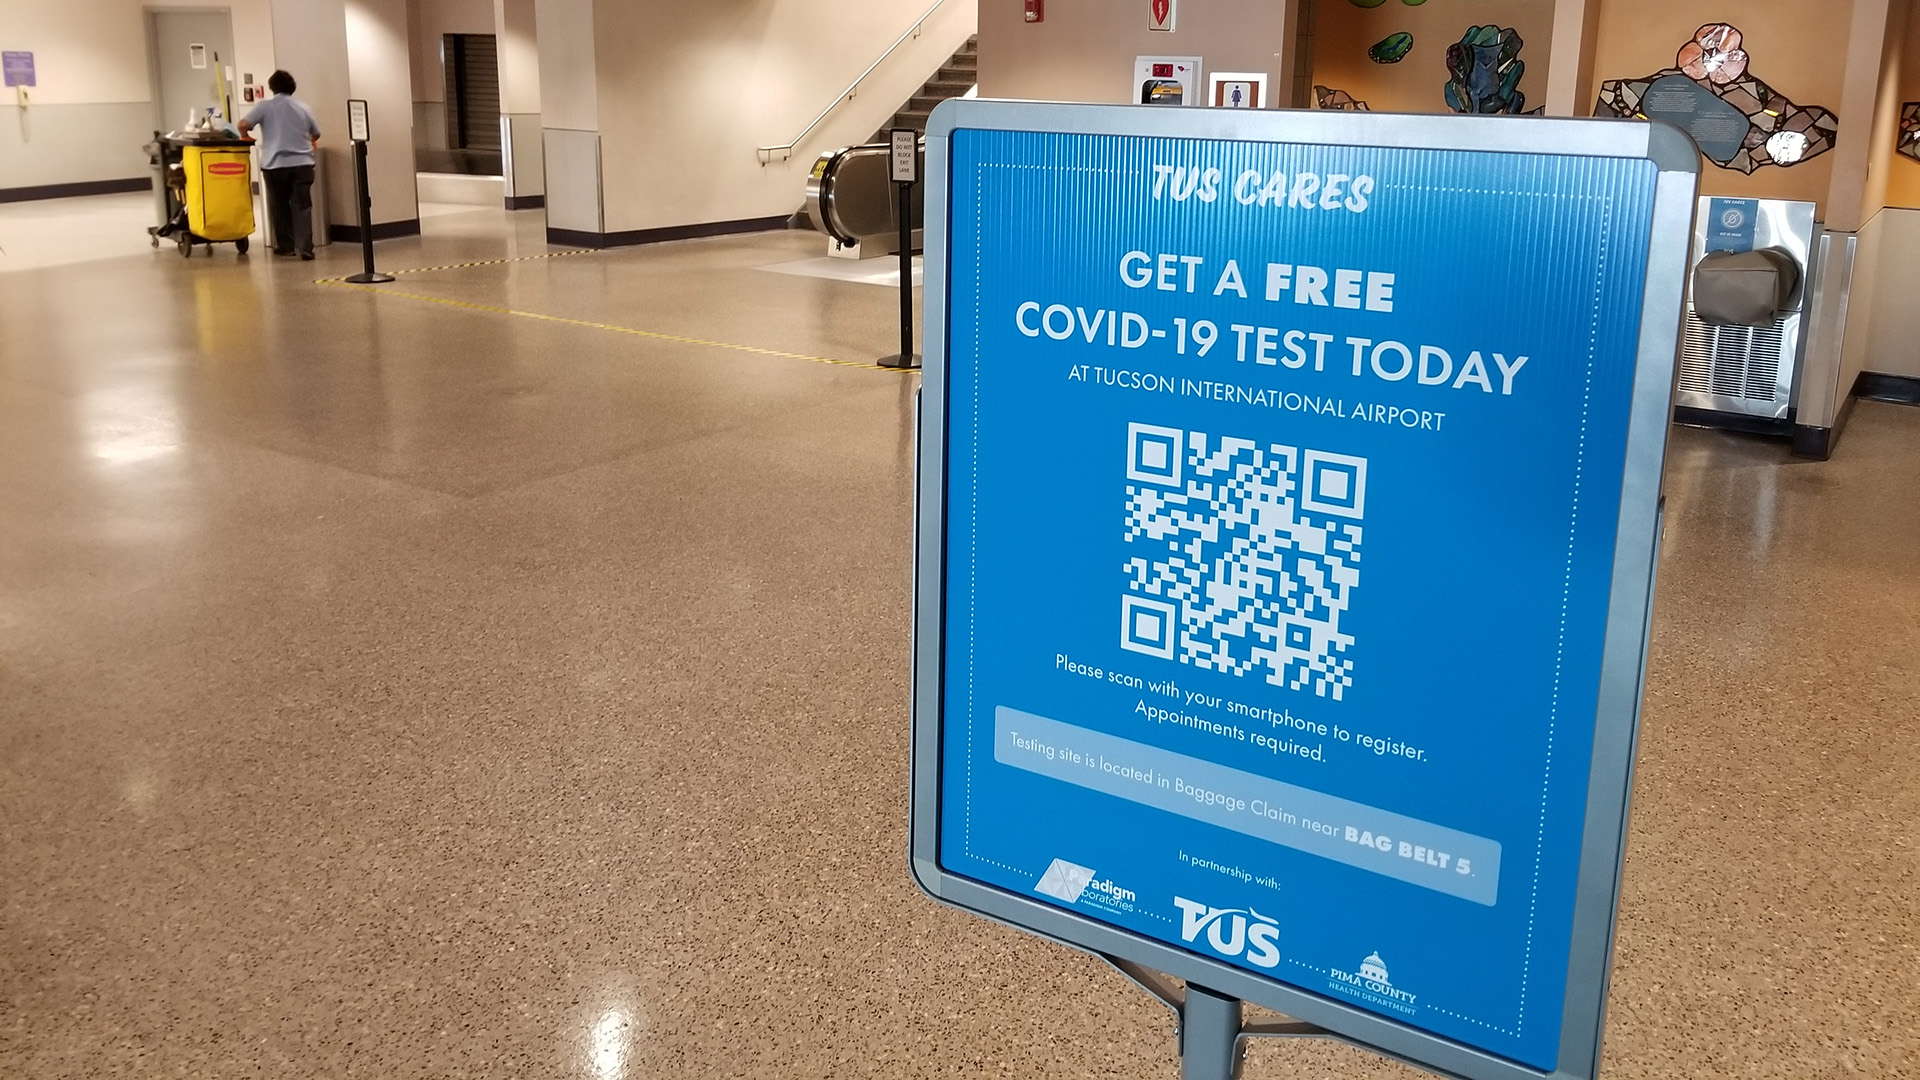 Sign directing people to the free COVID-19 testing site in the Tucson International Airport during the 2020 holiday season.